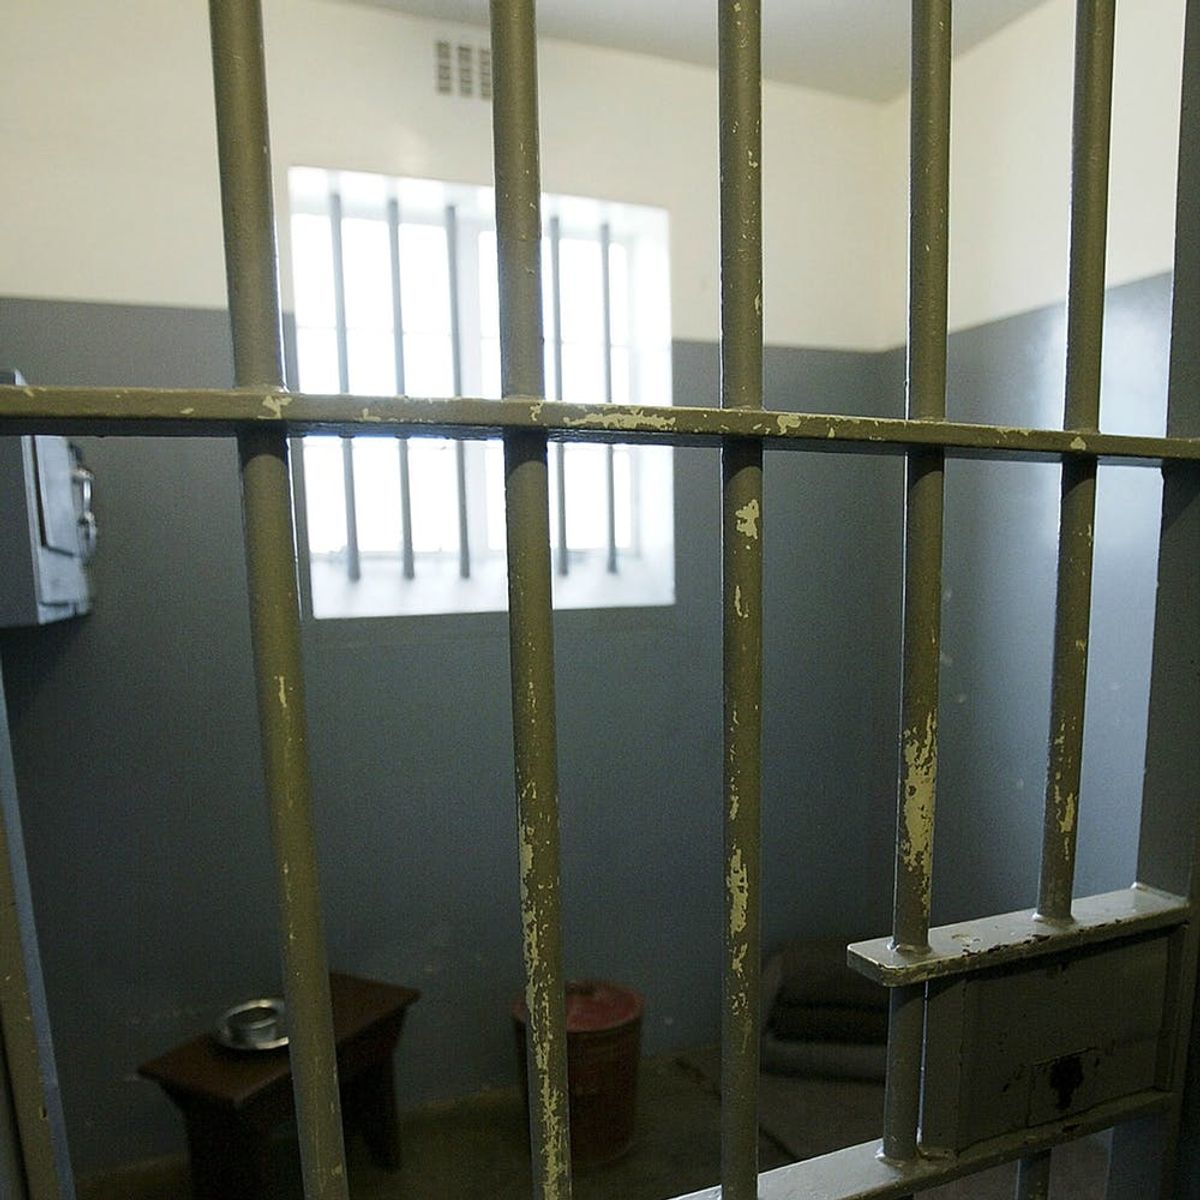 These Texas Inmates Broke Out of Their Cell for the Most Amazing Reason